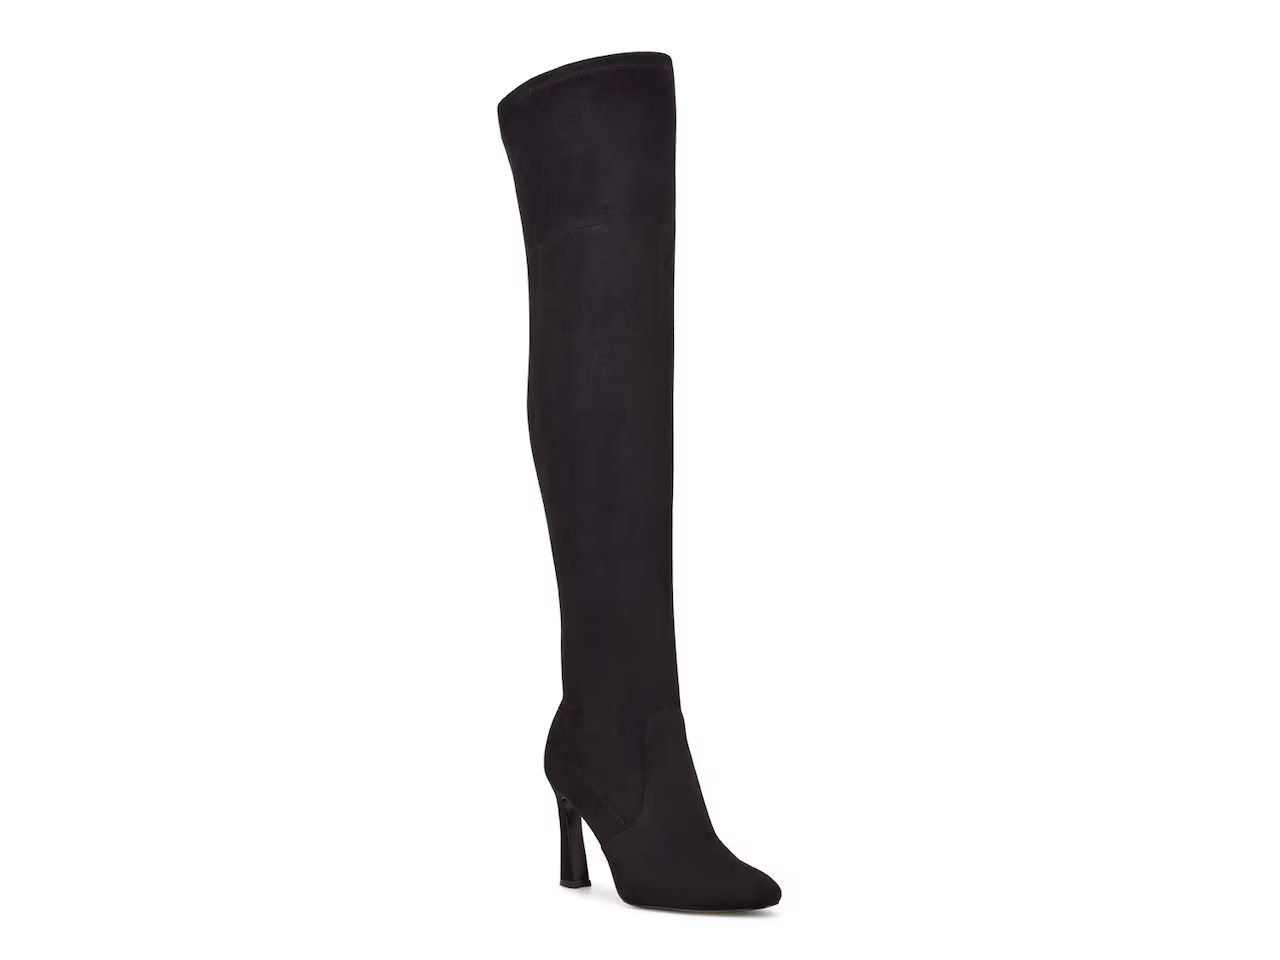 Sizzle 2 Over The Knee Boot | DSW